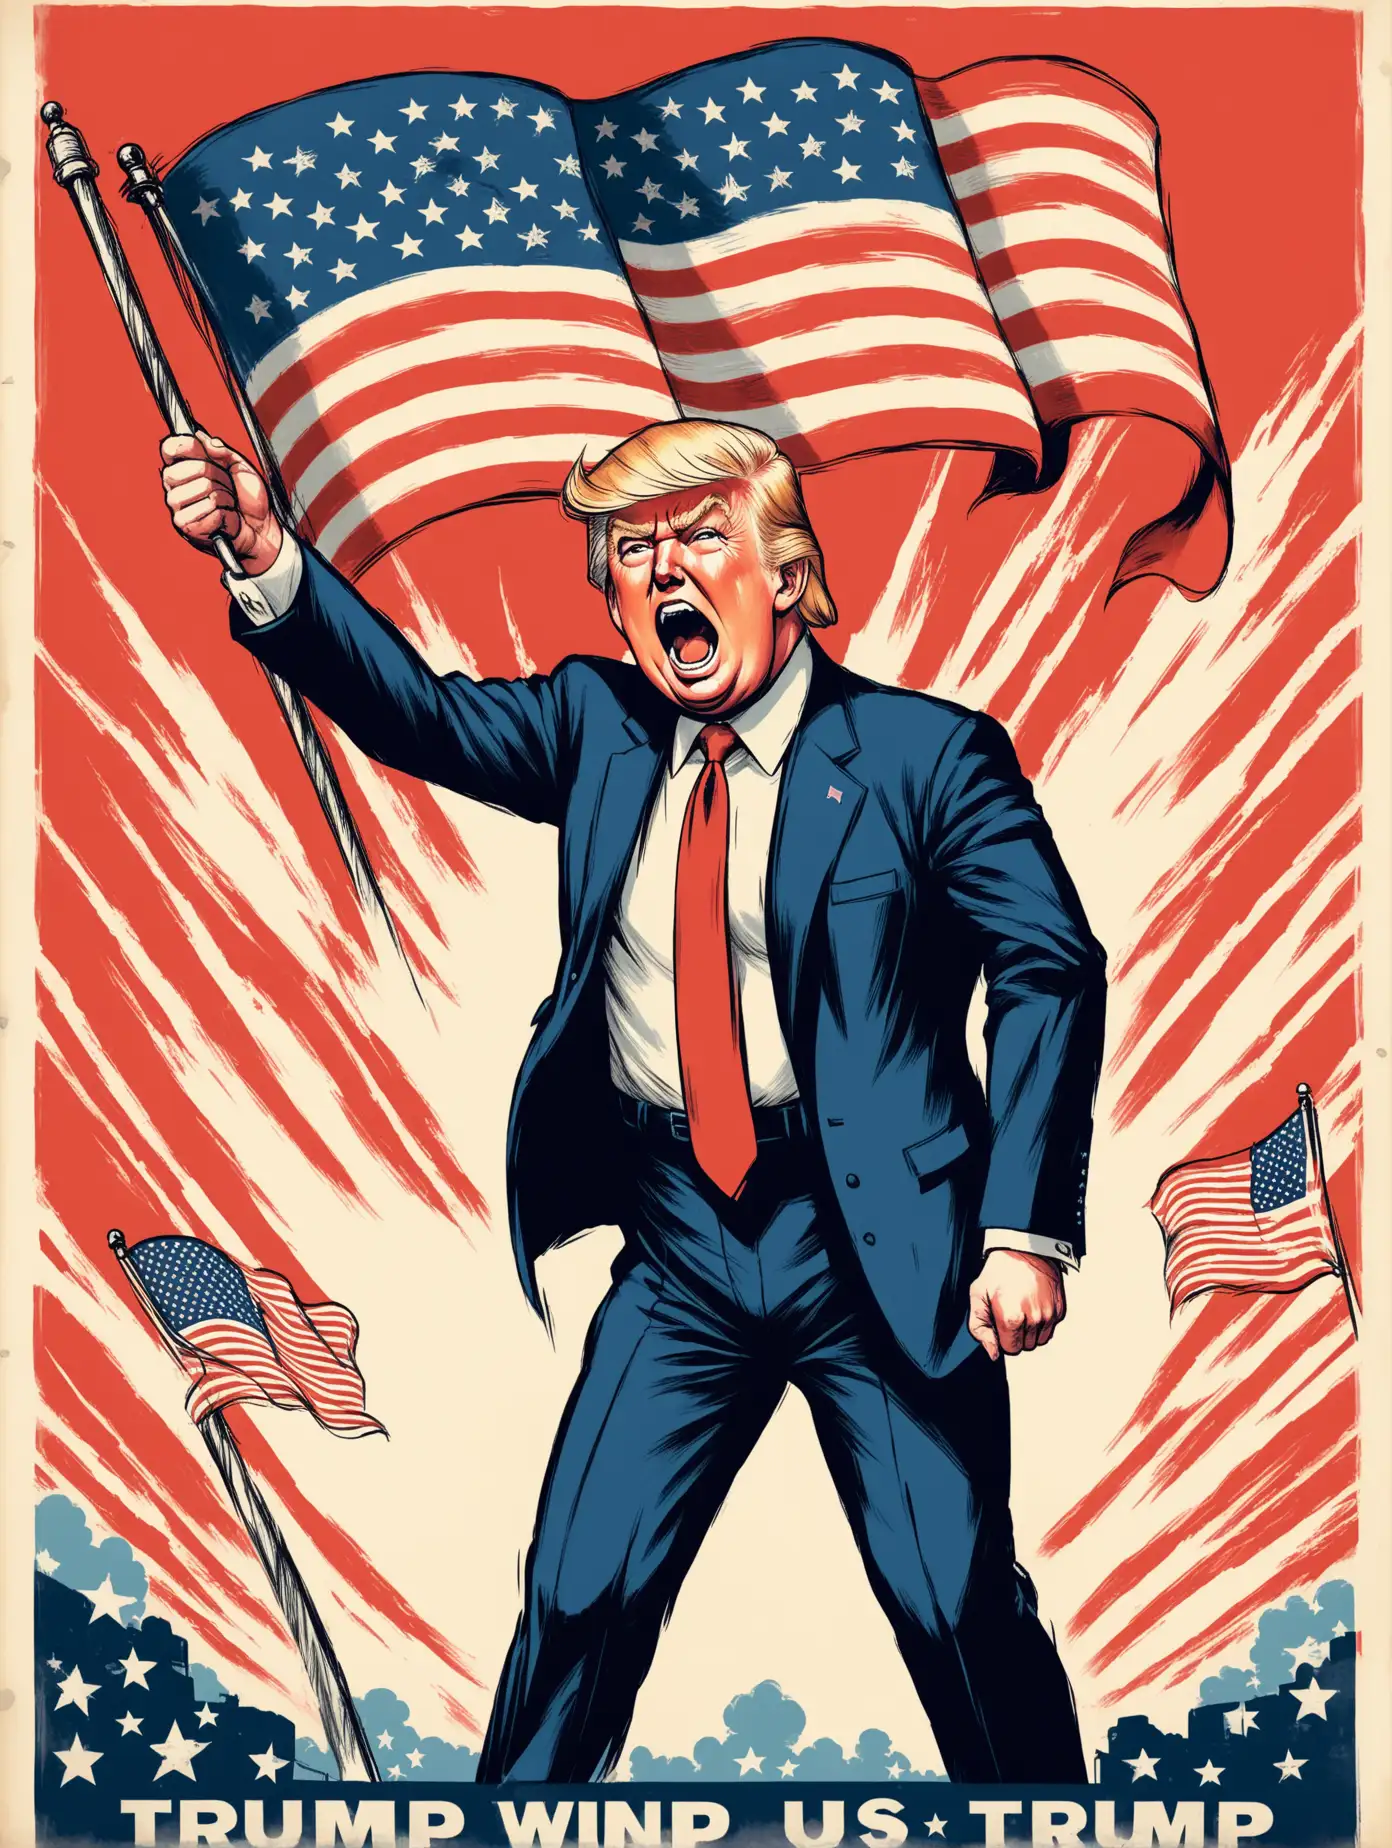 very patritic Trump waving with US flag in a wind, trumpcore, highly patriotic, screaming Trump, vintage poster